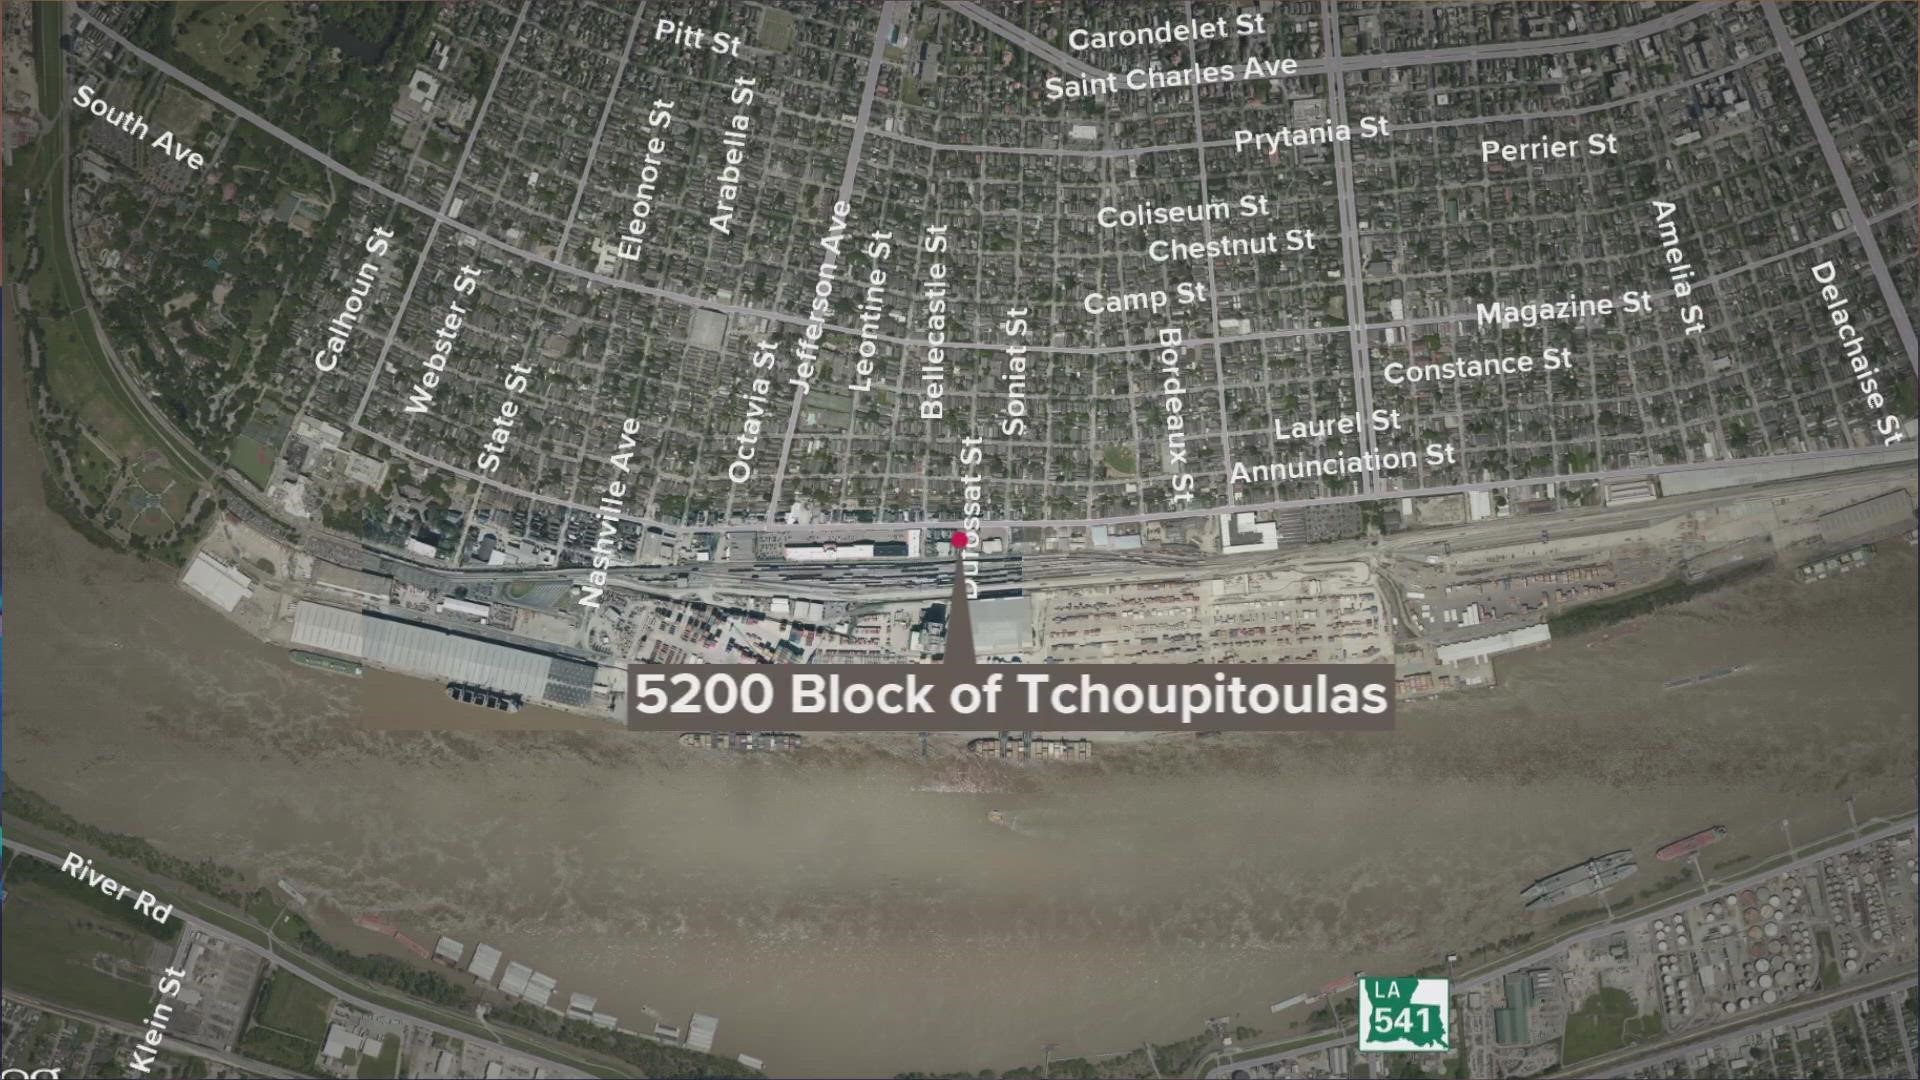 The incident occurred in the 5200 block of Tchoupiltoulas.